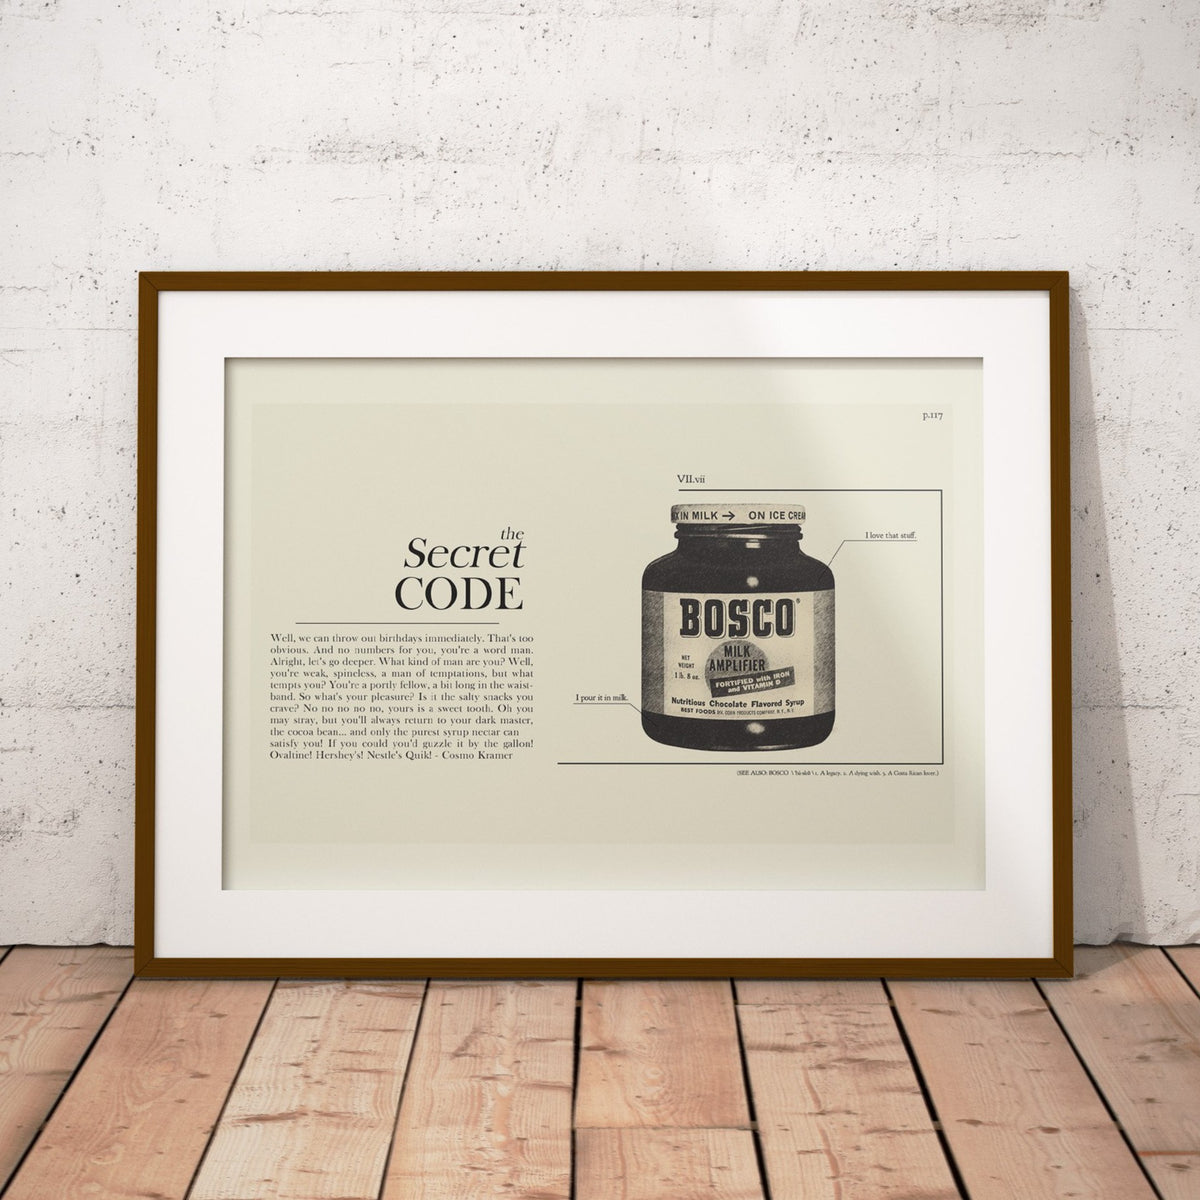 Seinfeld "The Secret Code" Schematic  | 12"x18" or 18"x24" Print only